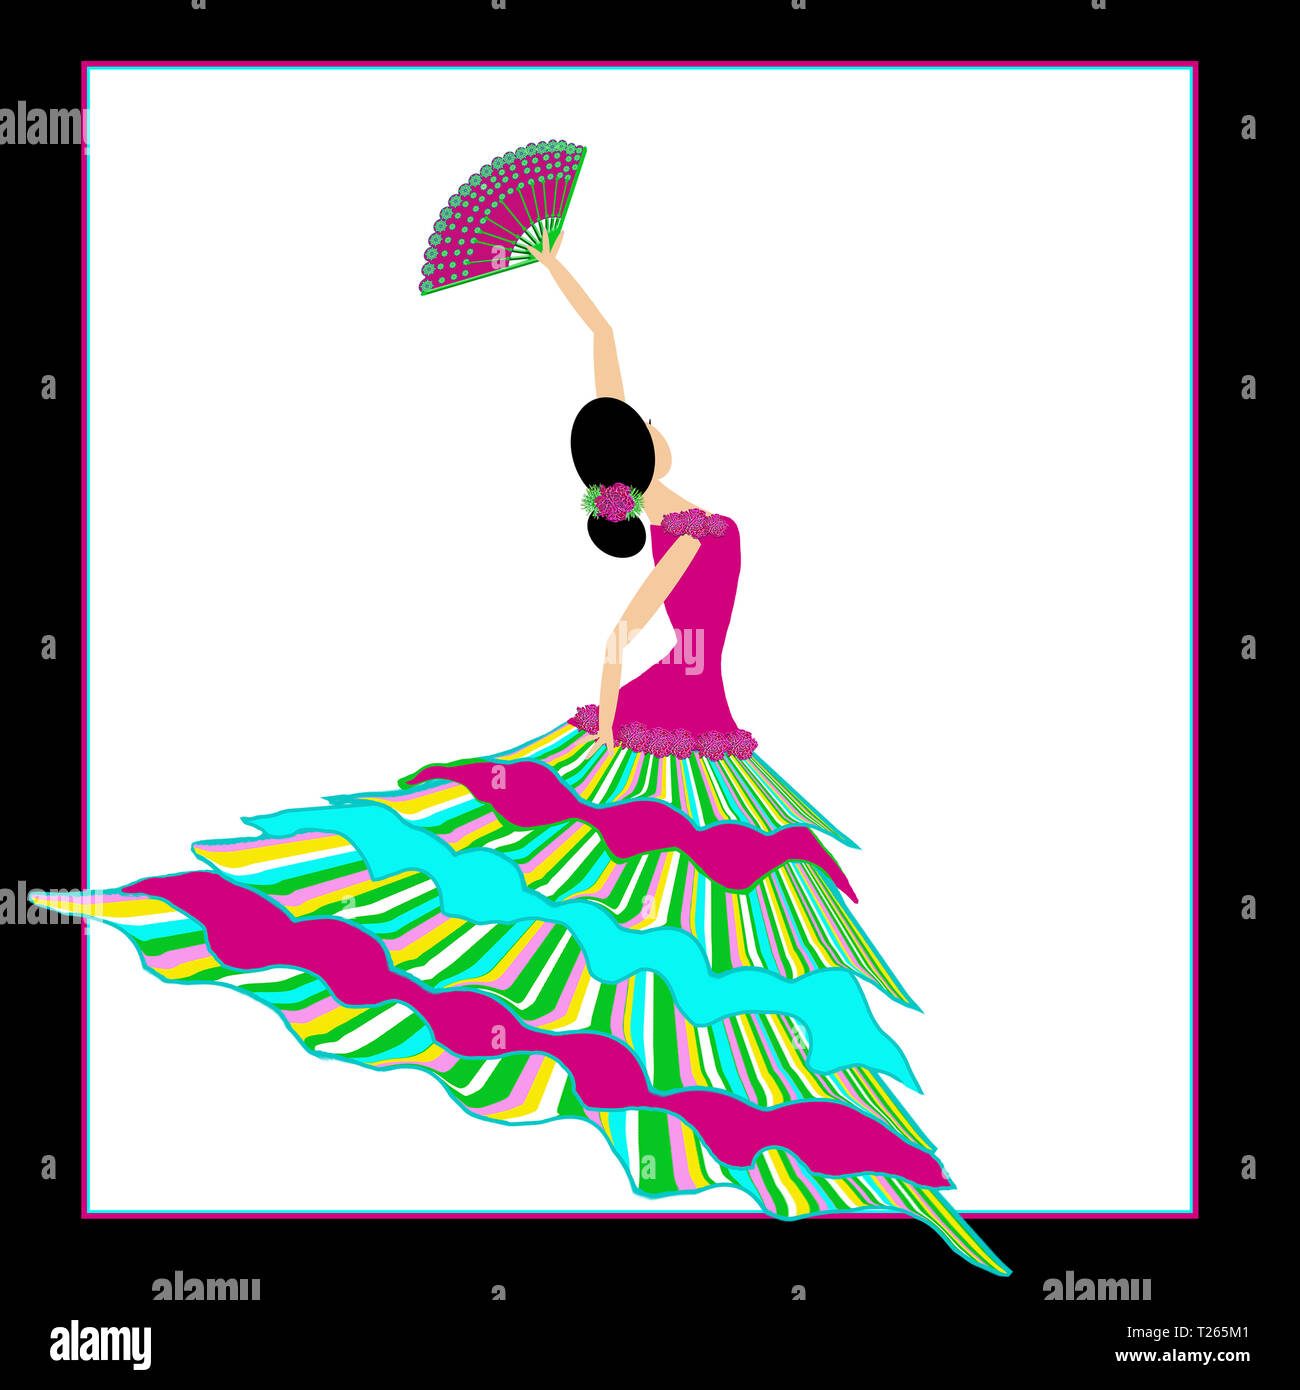 Graphic Flamenco Dancer wearing long vividly colored dress waving an ornate fan while dancing.  Isolated on white and/or black backgrounds. Stock Photo